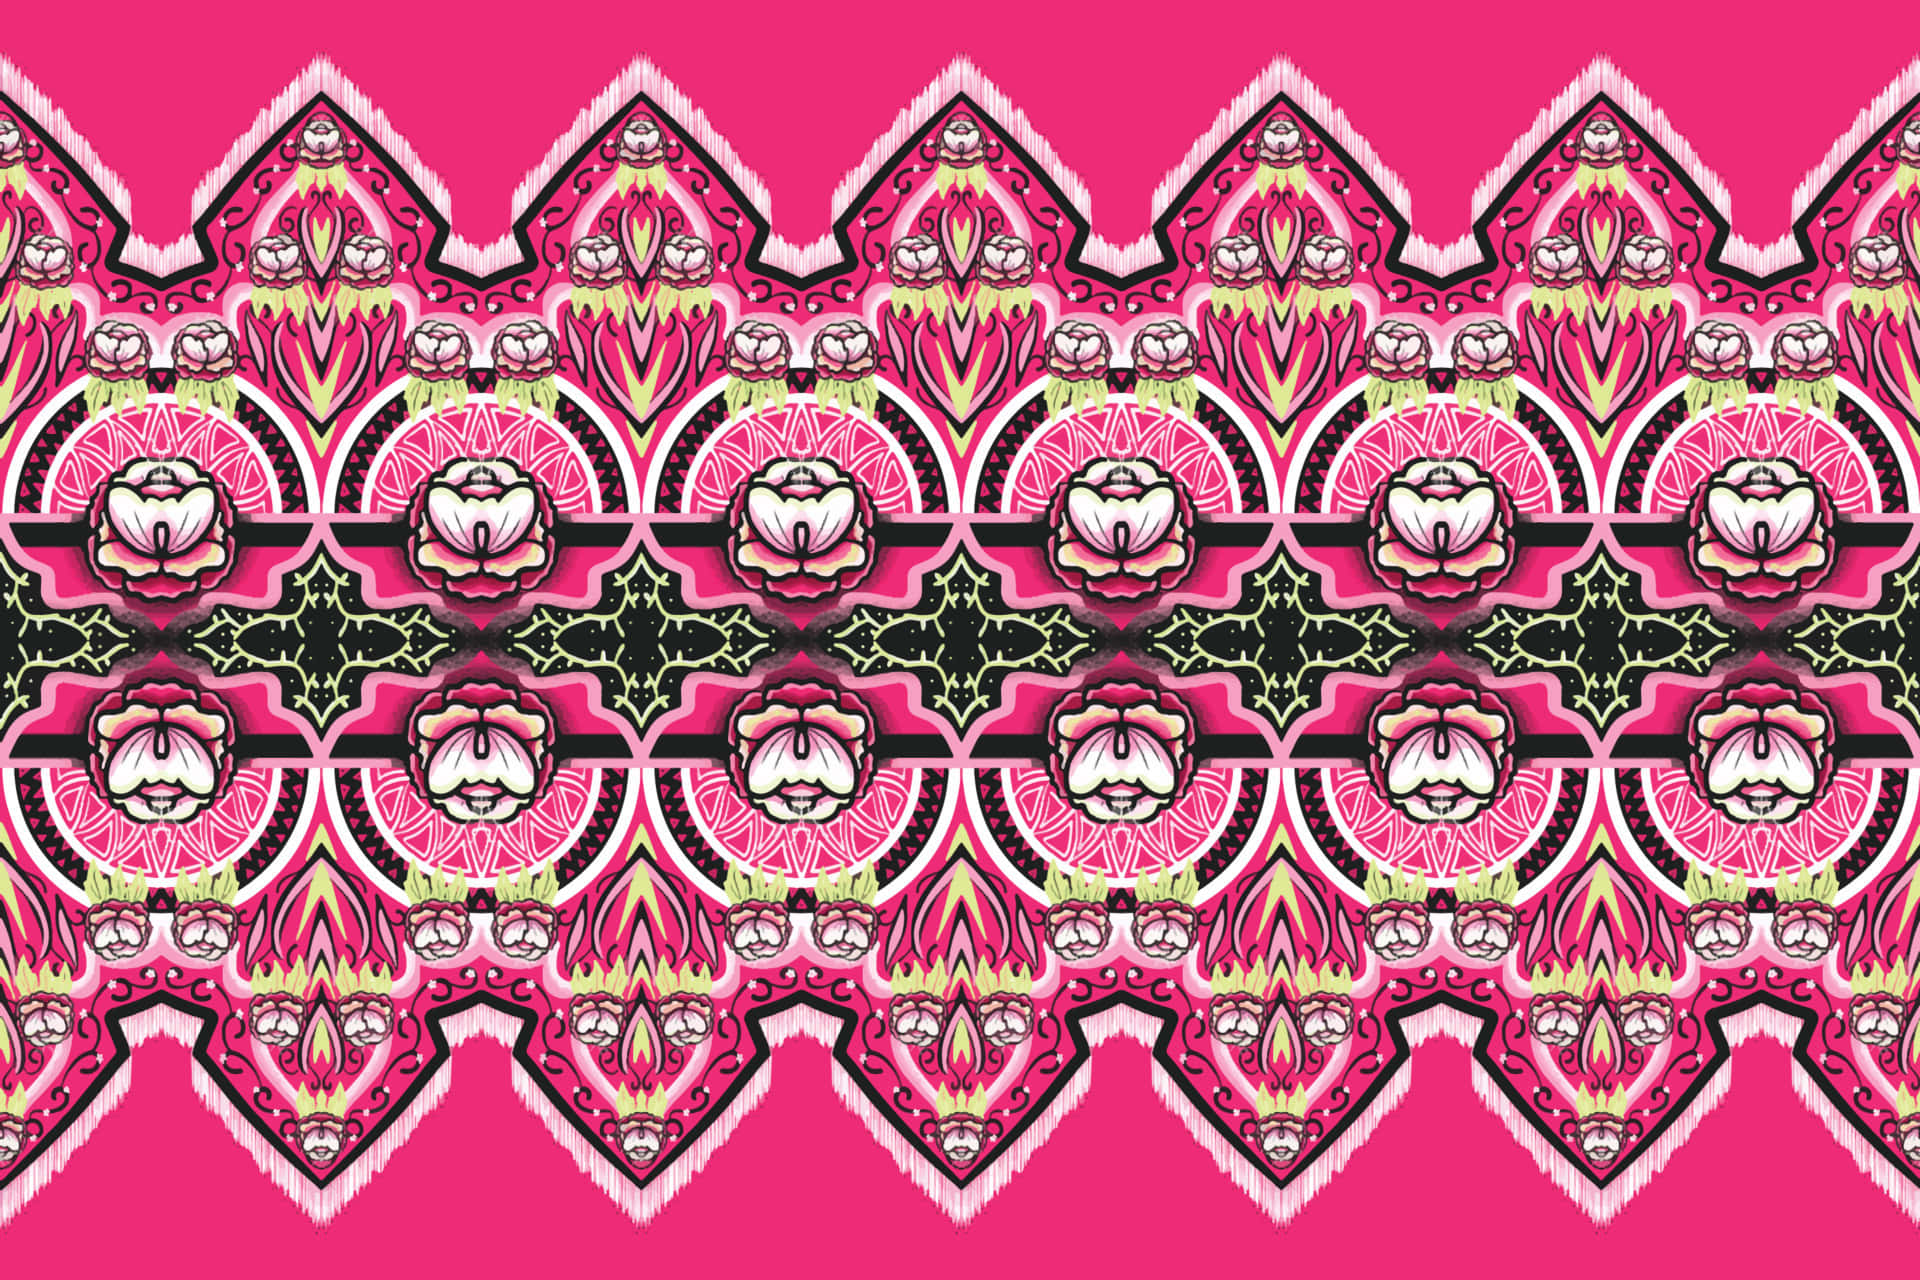 Its all in the details as seen in this Pink, Black and White artwork. Wallpaper